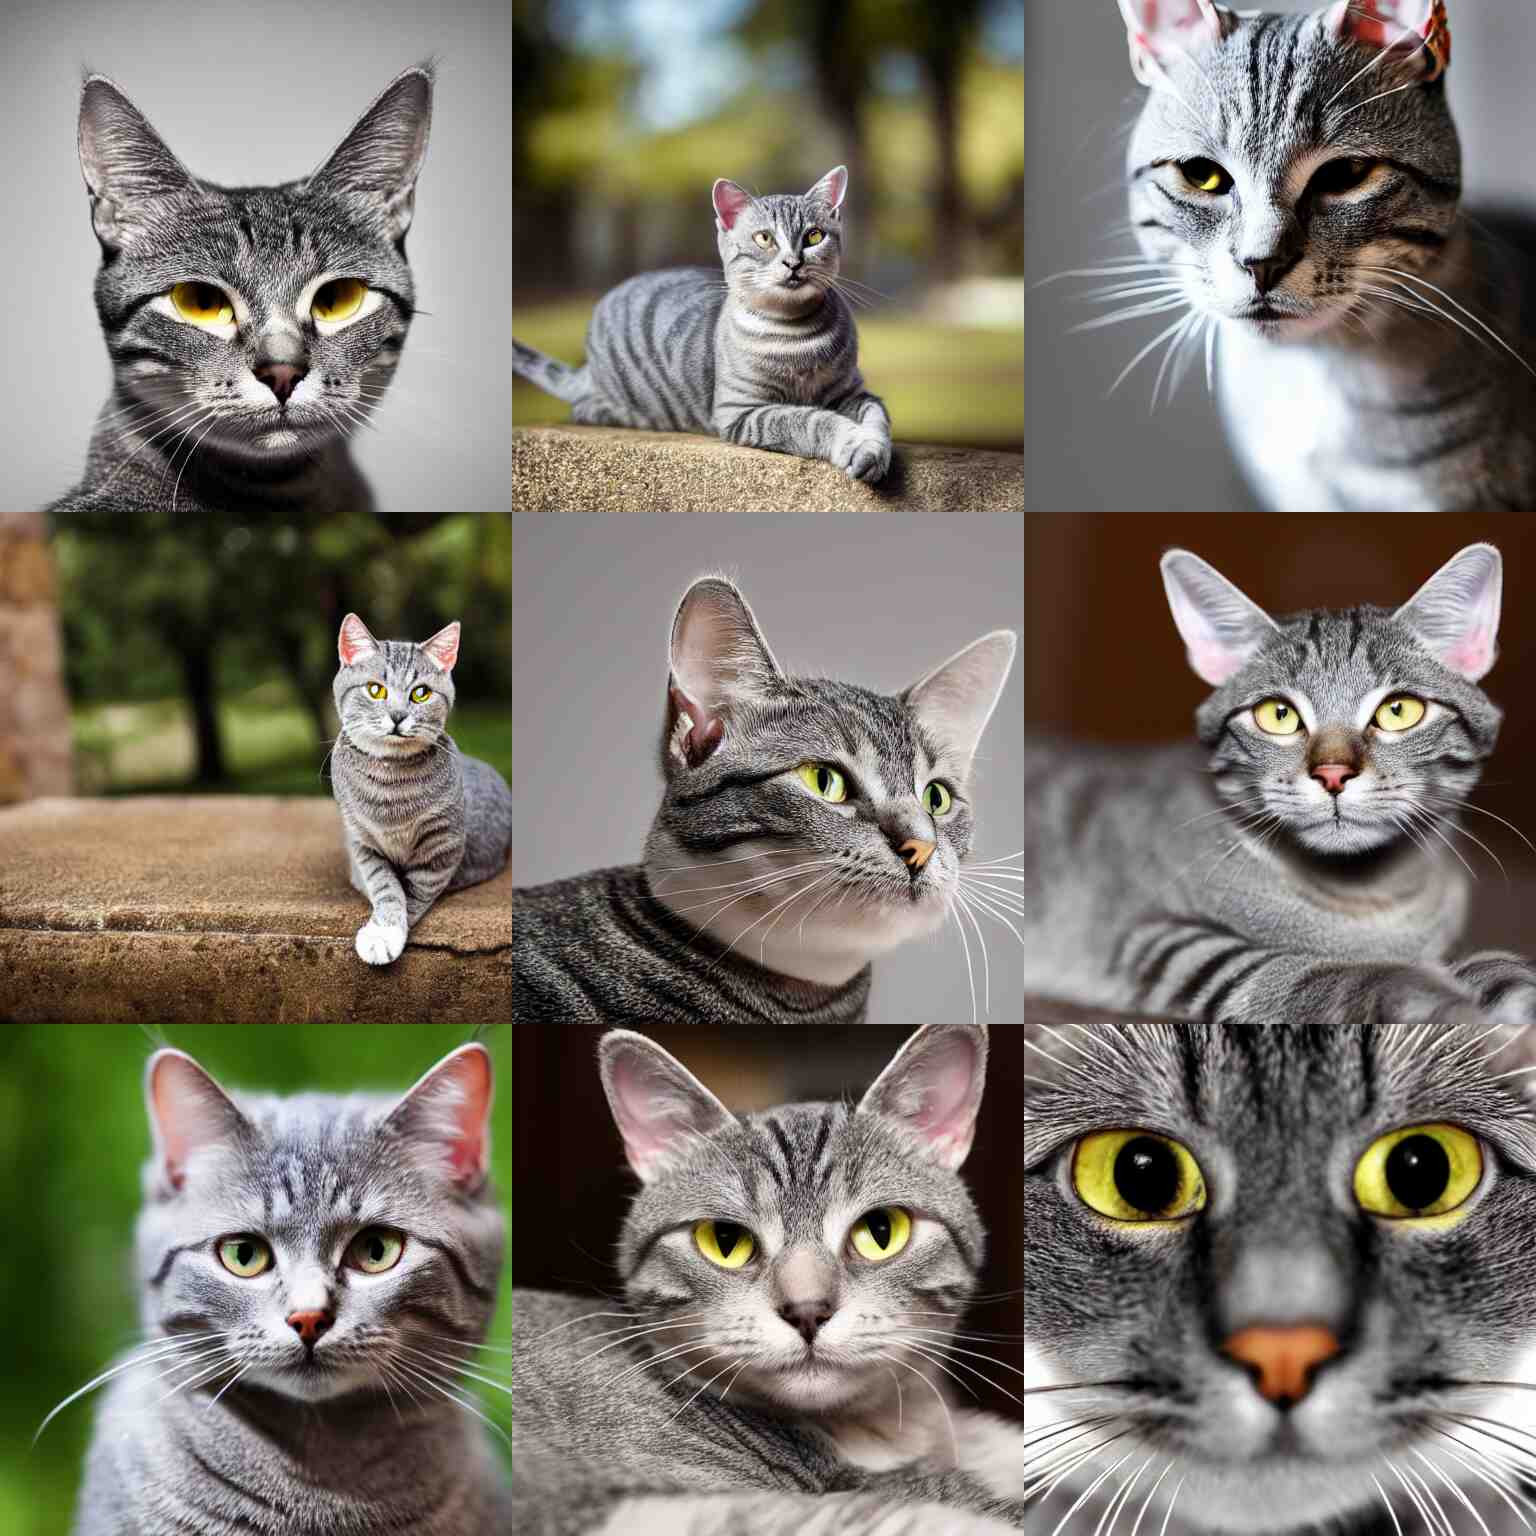 3 Low Cost APIs For Detecting Cats In Images By Breed (2023)